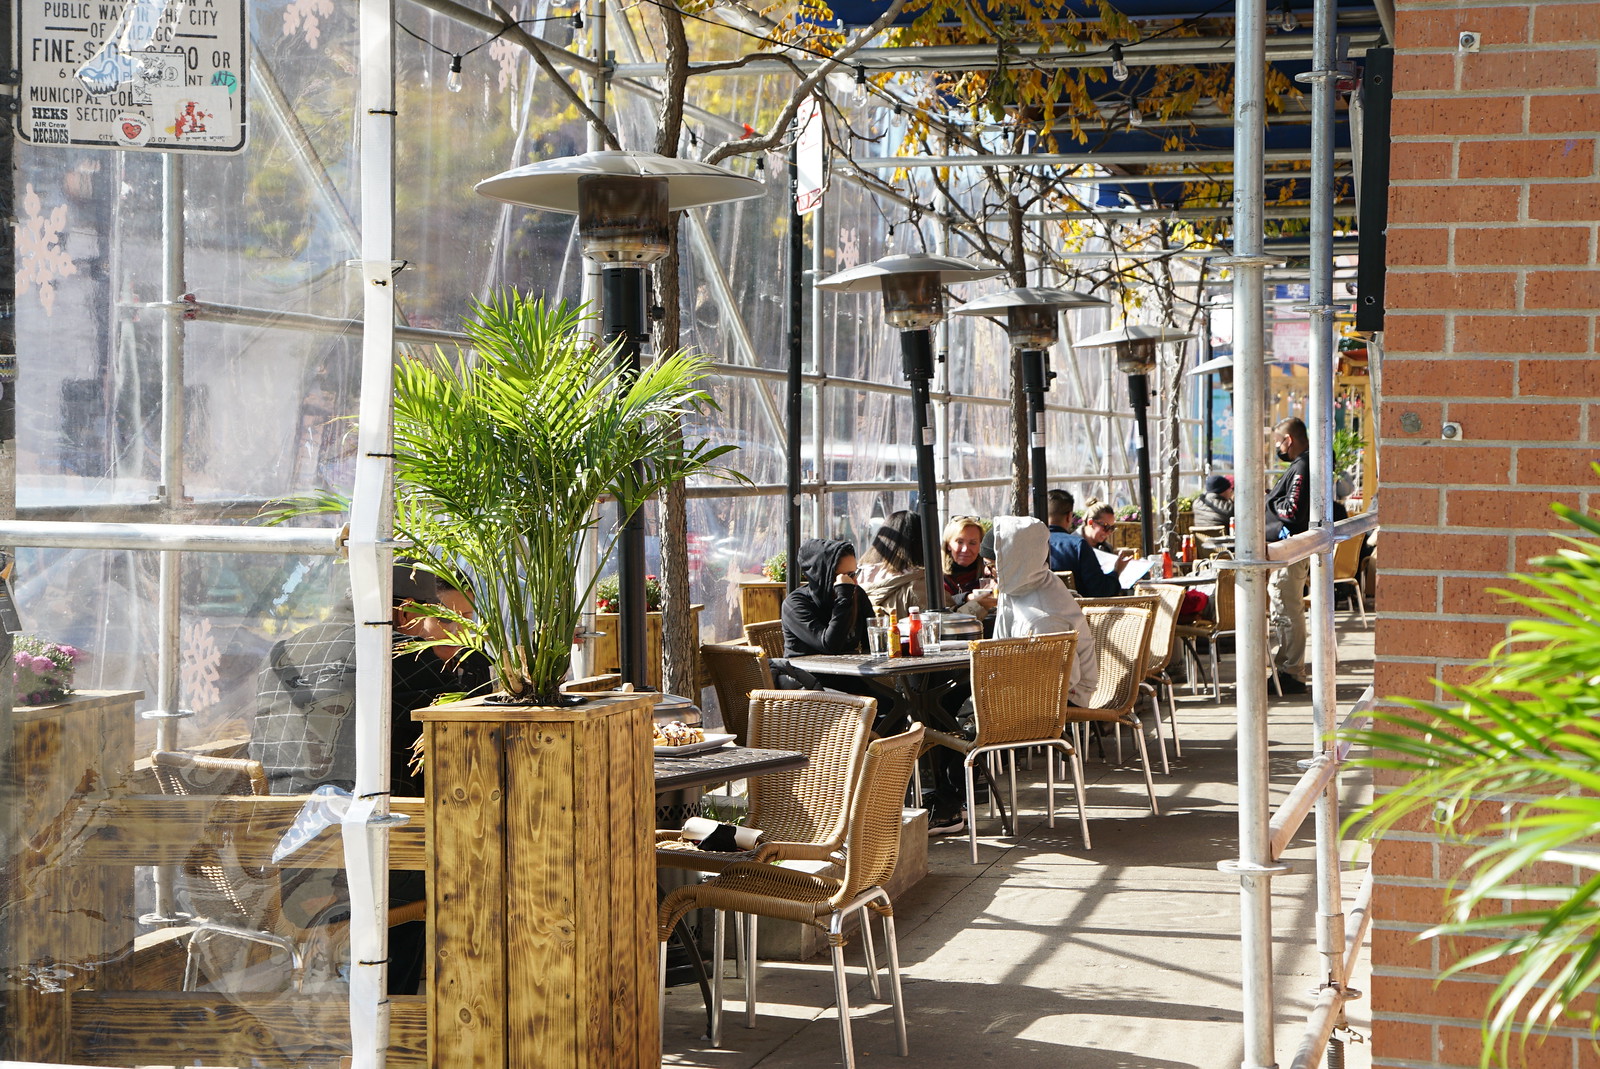 An outdoor dining area with heaters and people sitting at tables that’s covered.